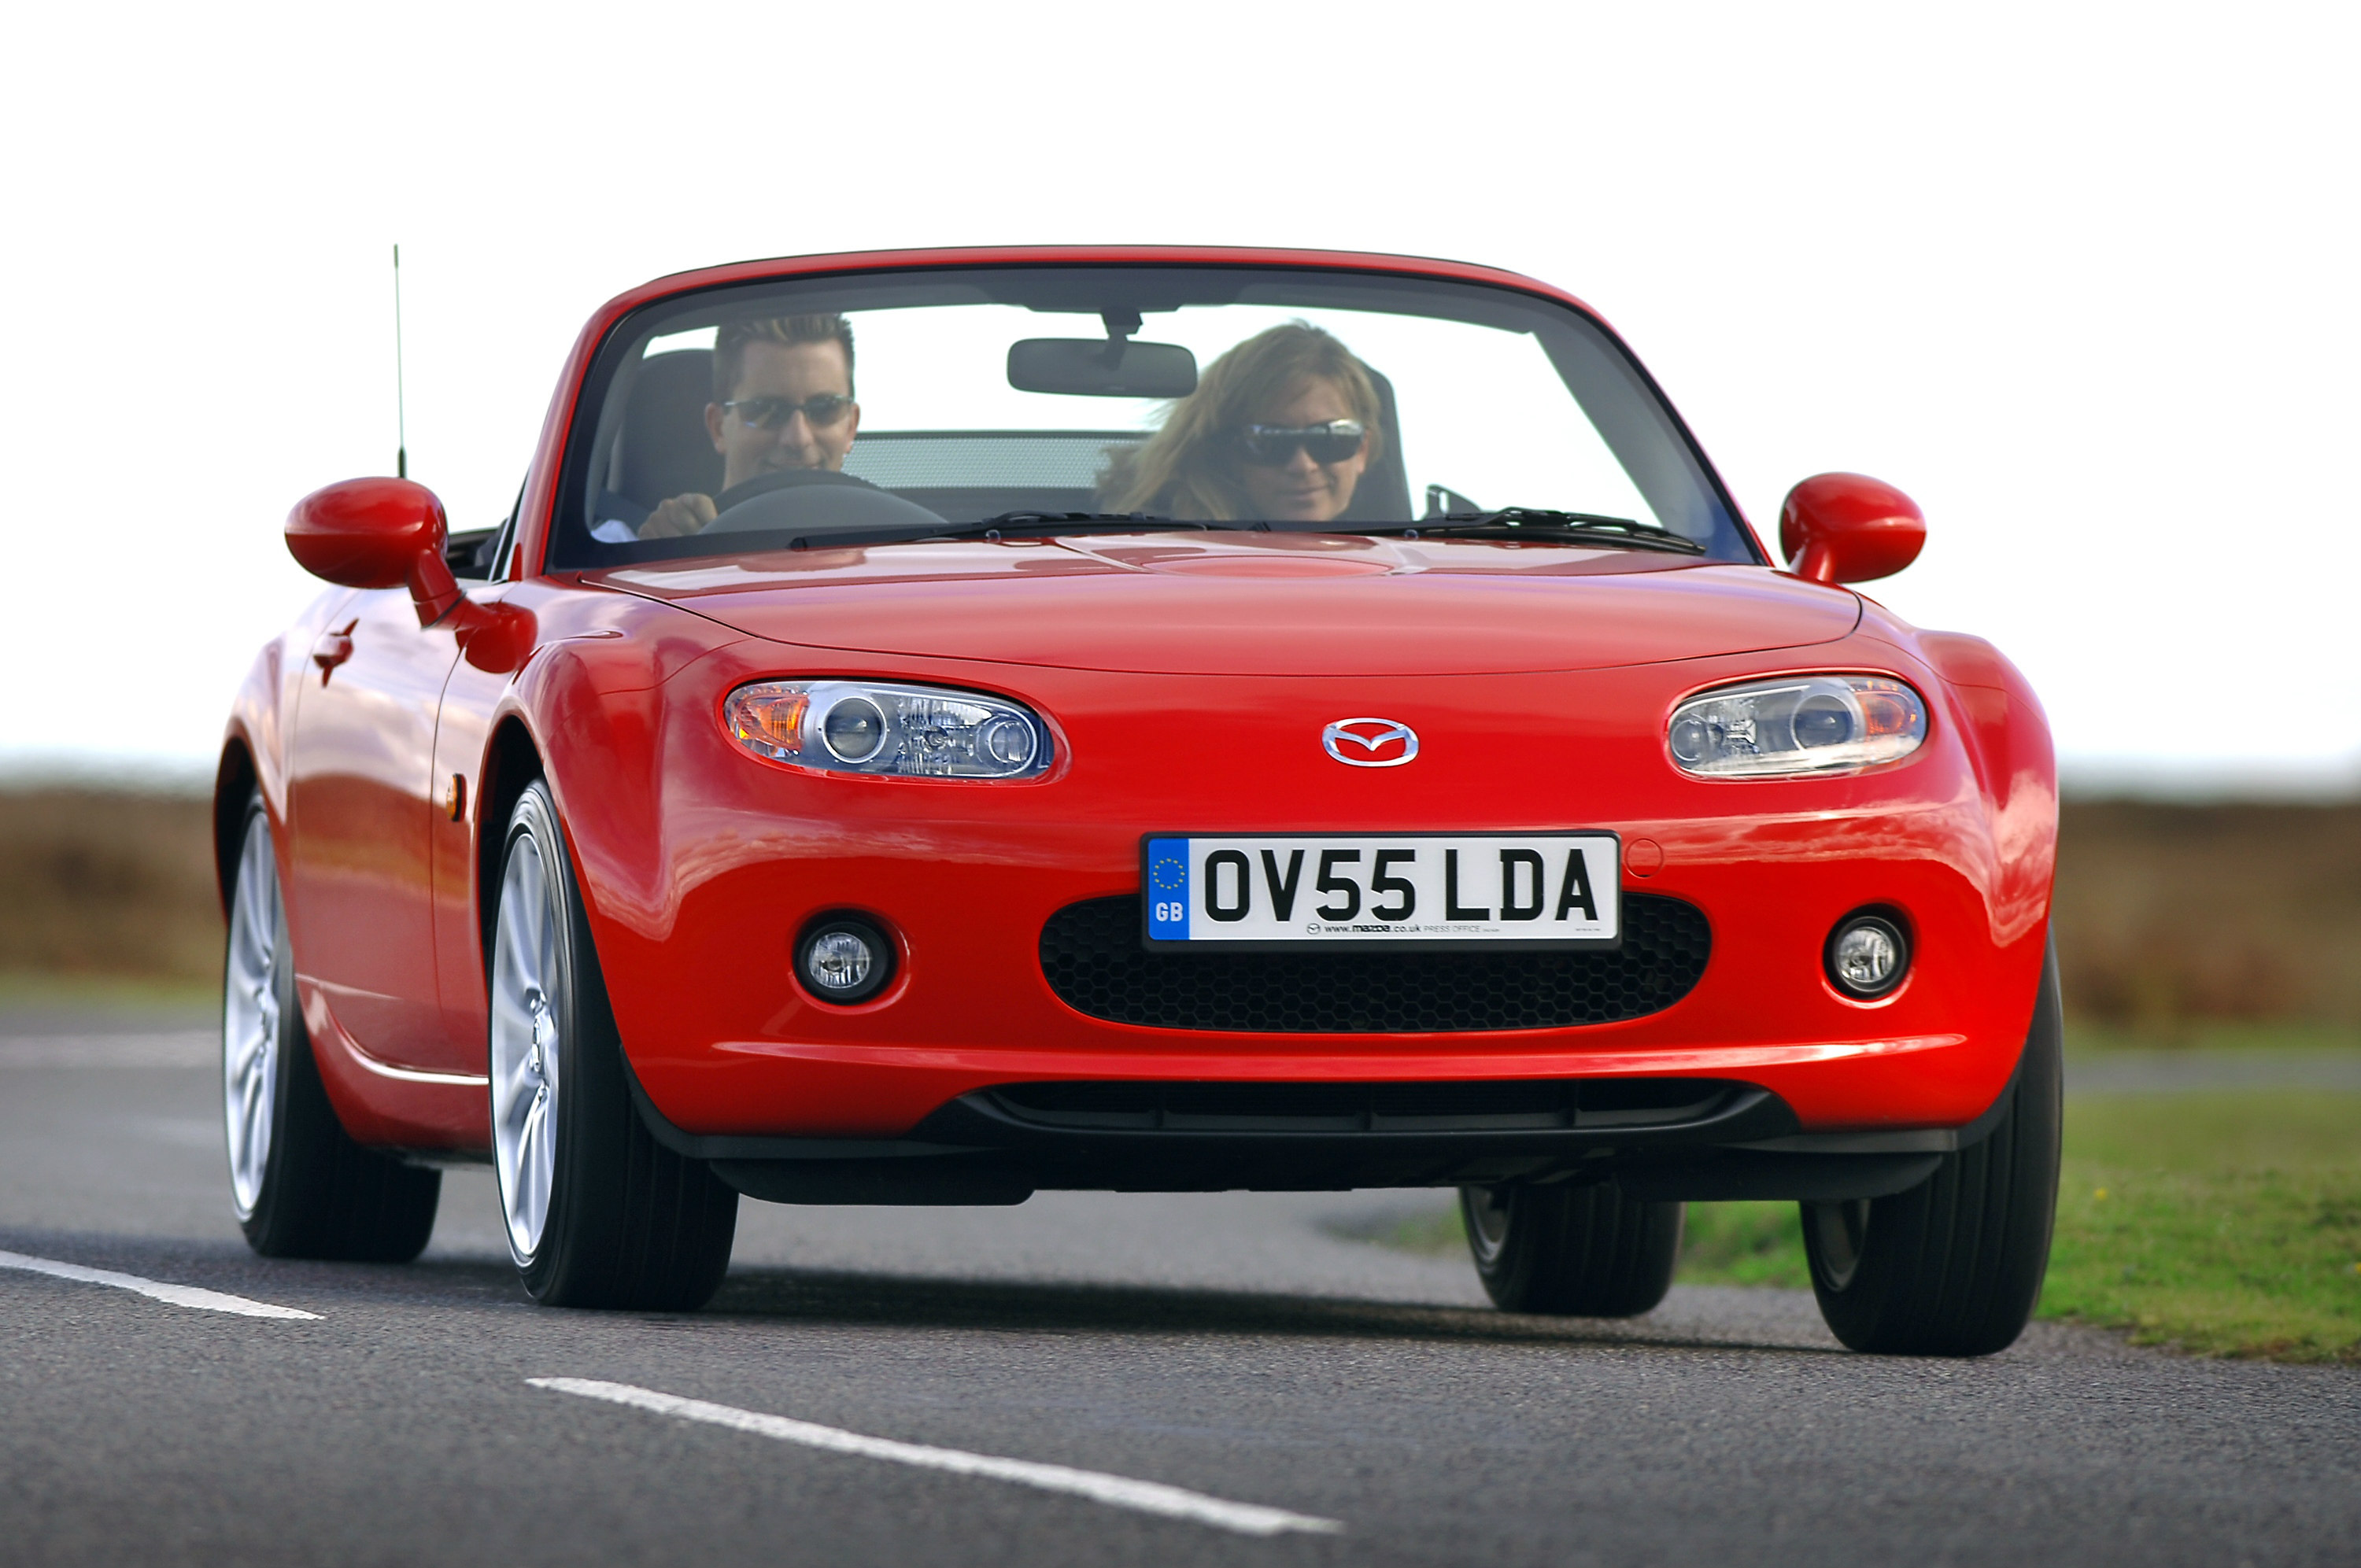 Buying guide: fantastically fun £6000 used cars, including the Mazda MX-5